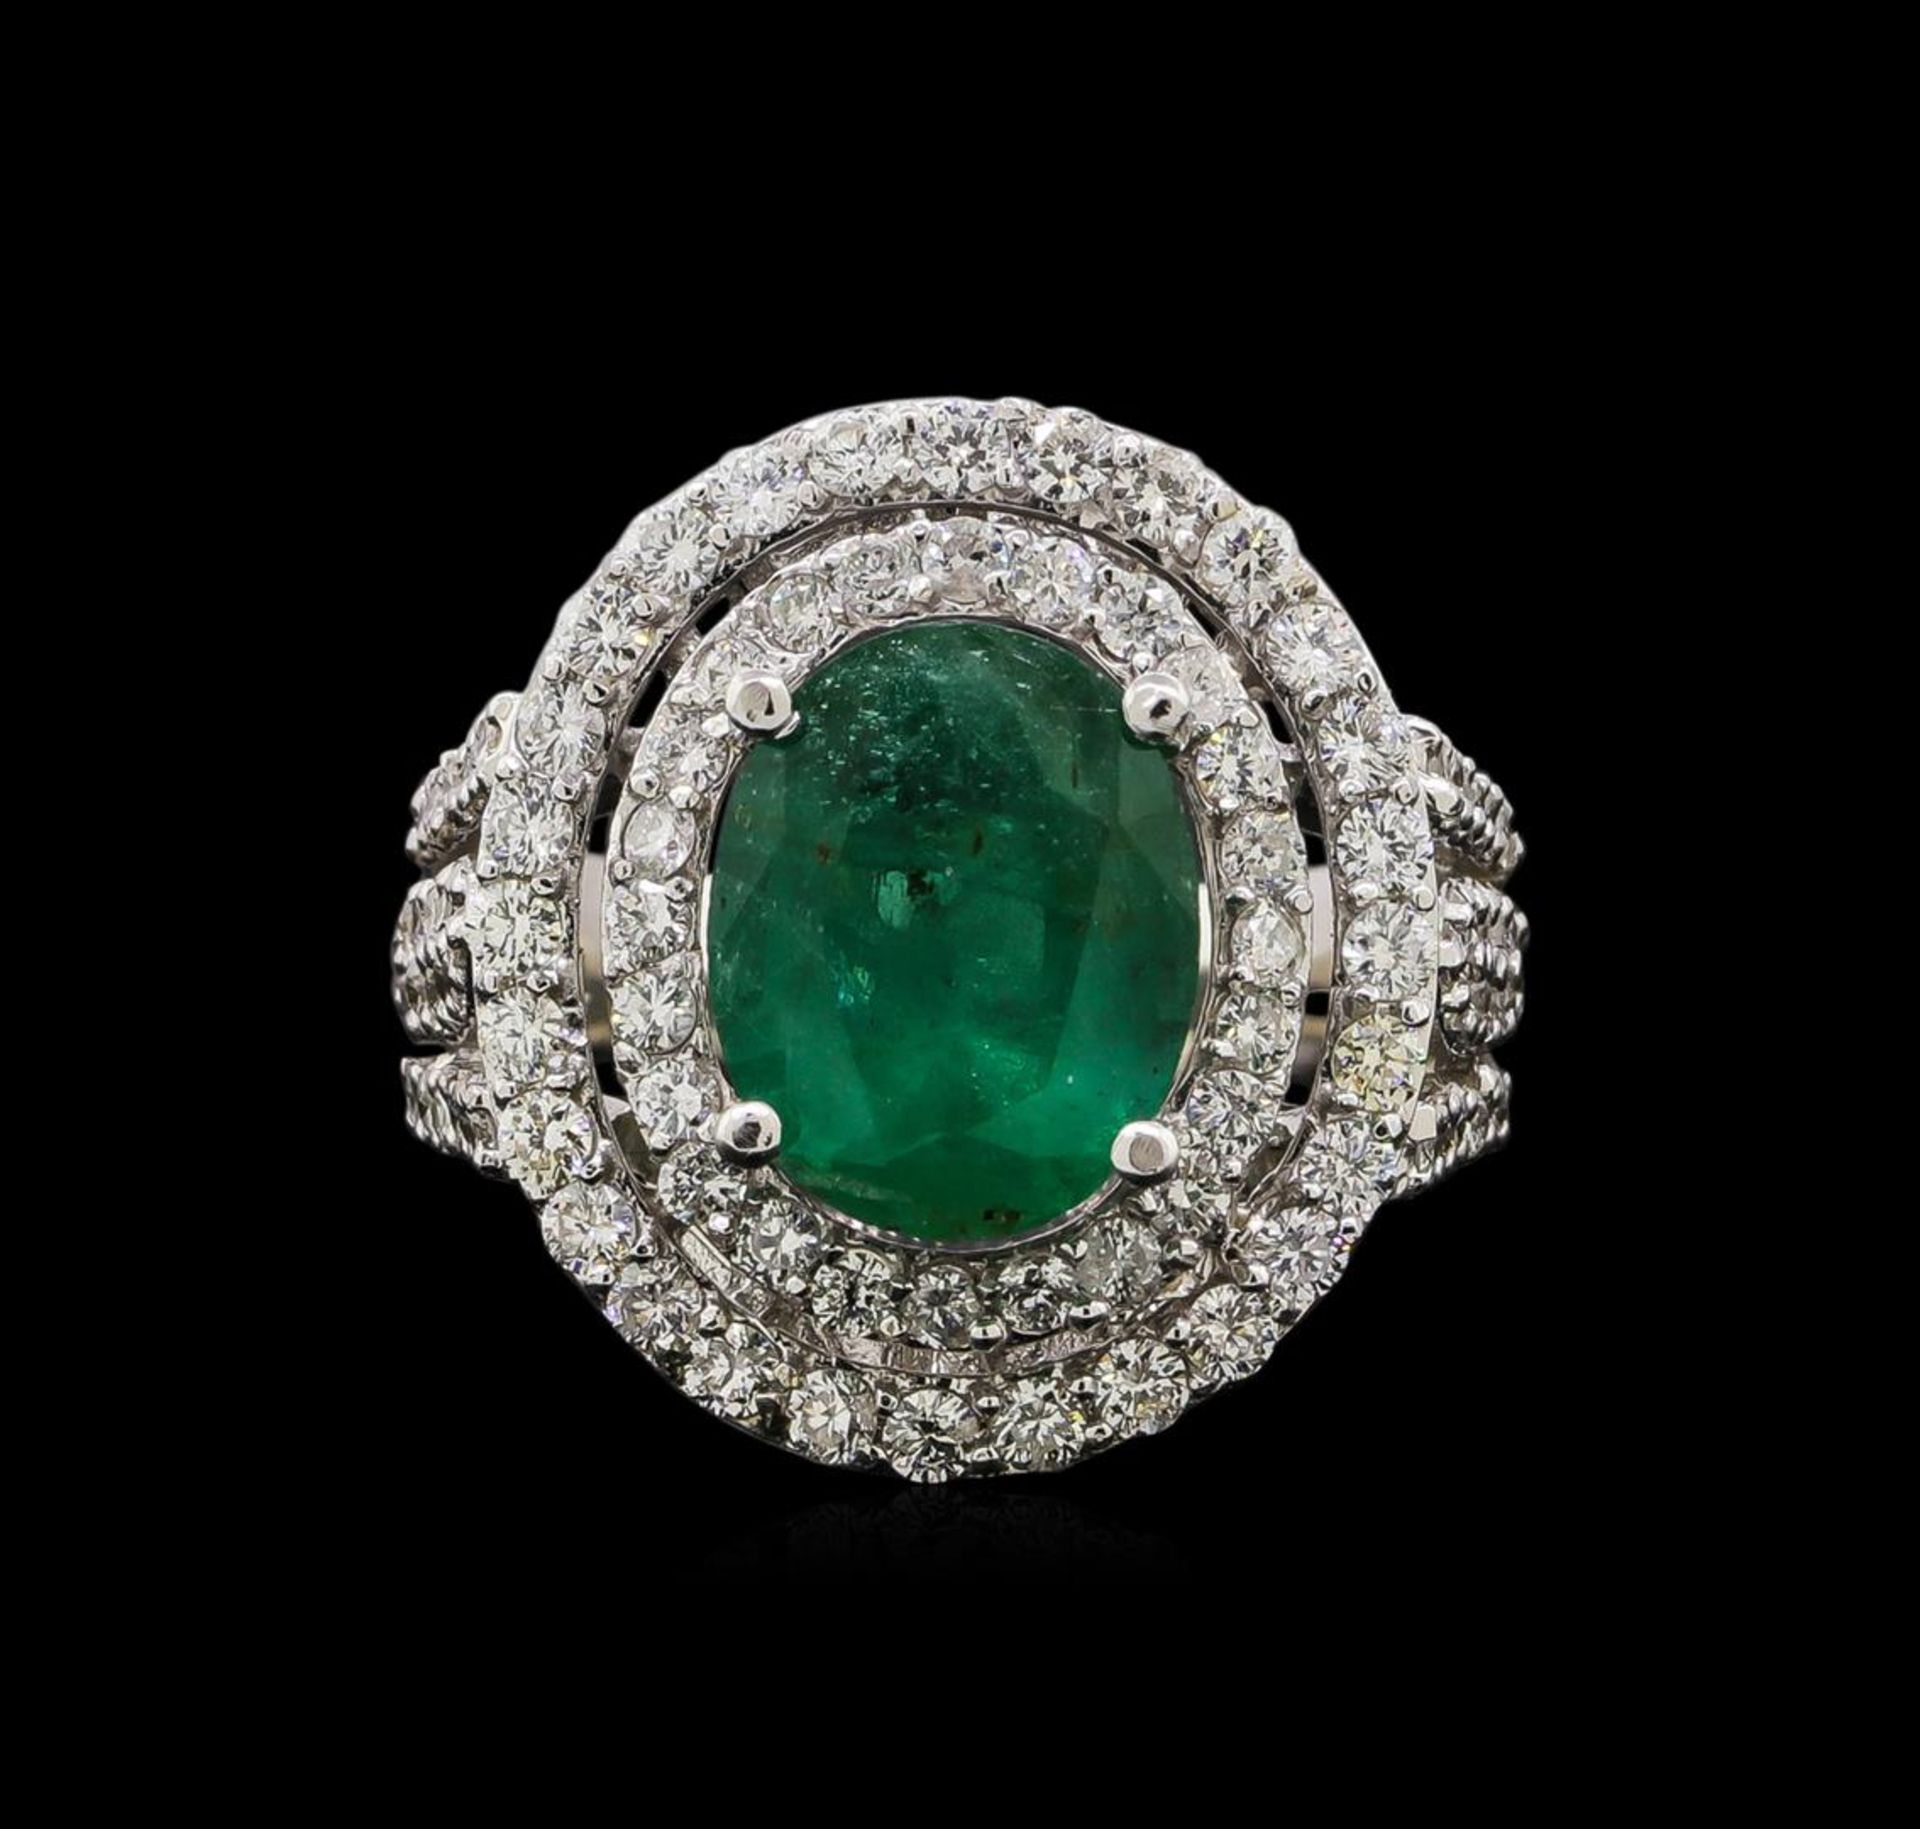 14KT White Gold 3.58 ctw Emerald and Diamond Ring - Image 2 of 5